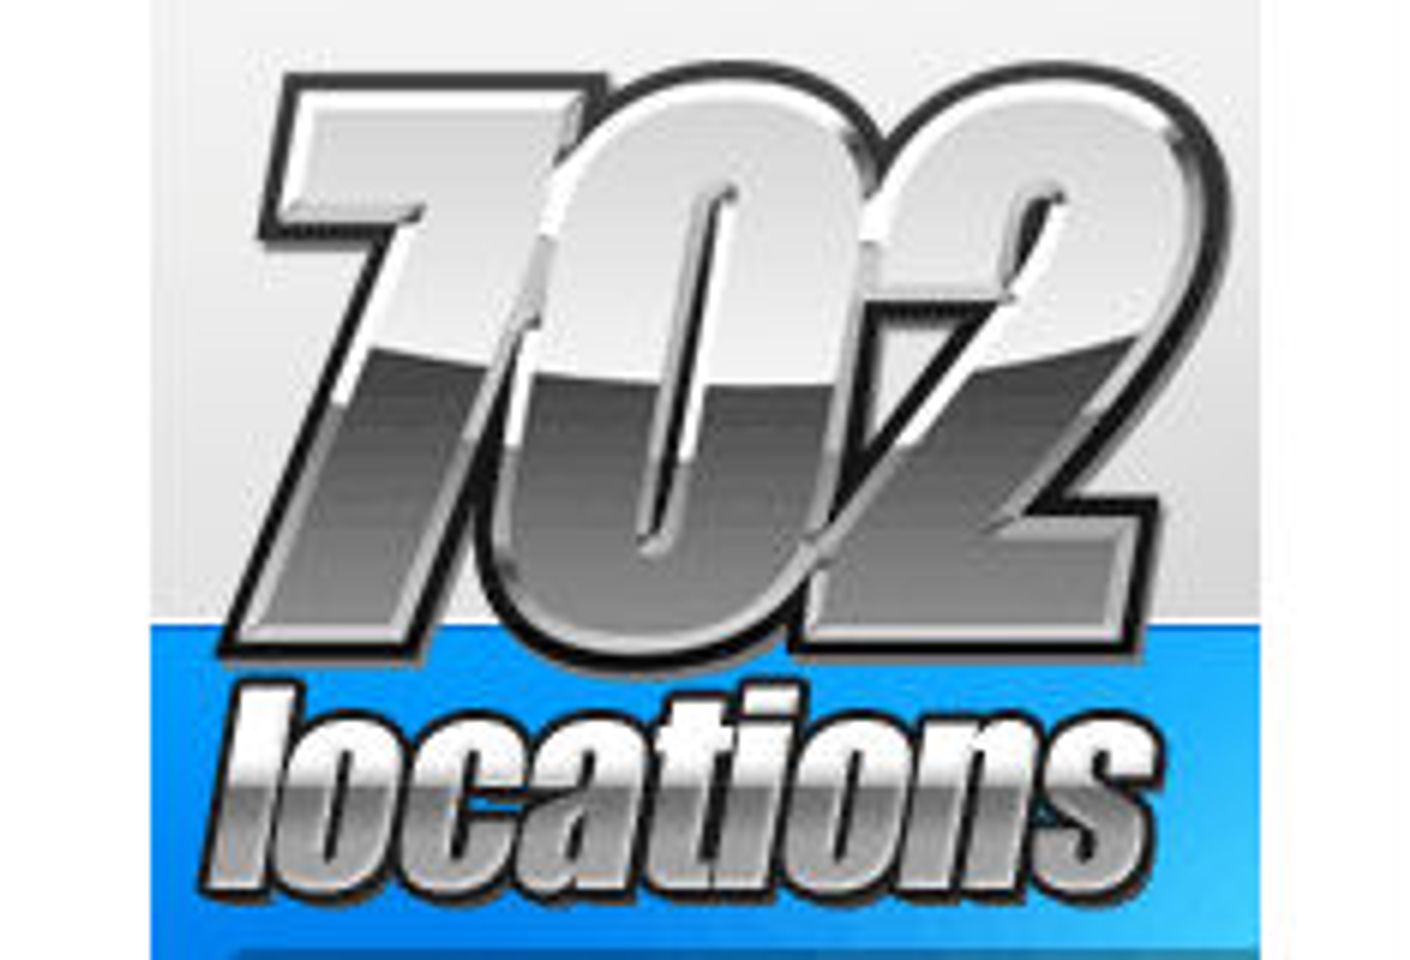 702 Locations Offers Vegas Real Estate for Filming or Purchase